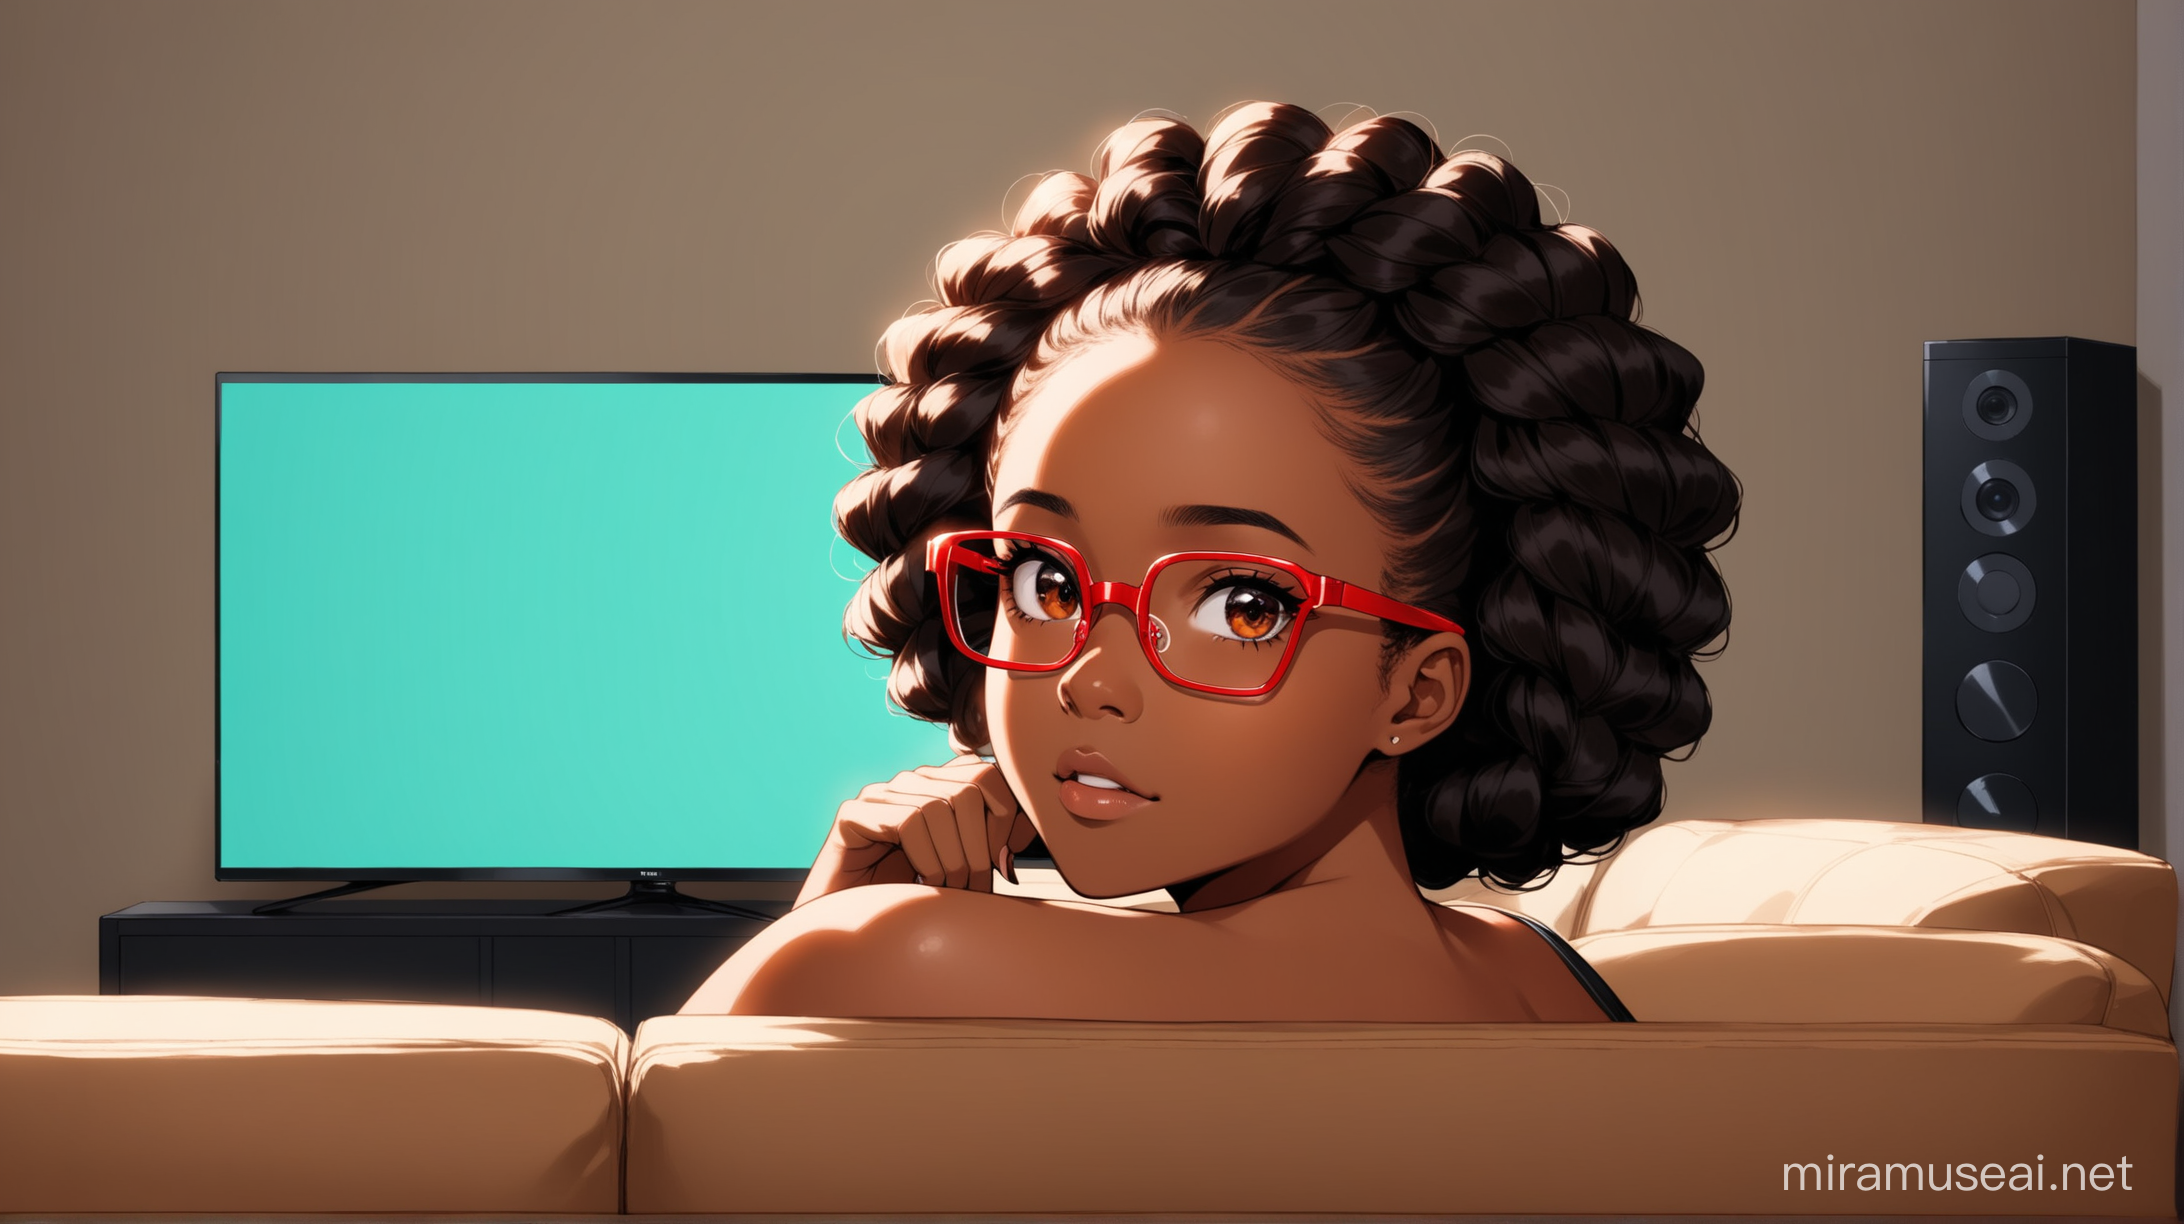 Young Woman with Passion Twist Hairstyle Watching TV in Red Eyeglasses